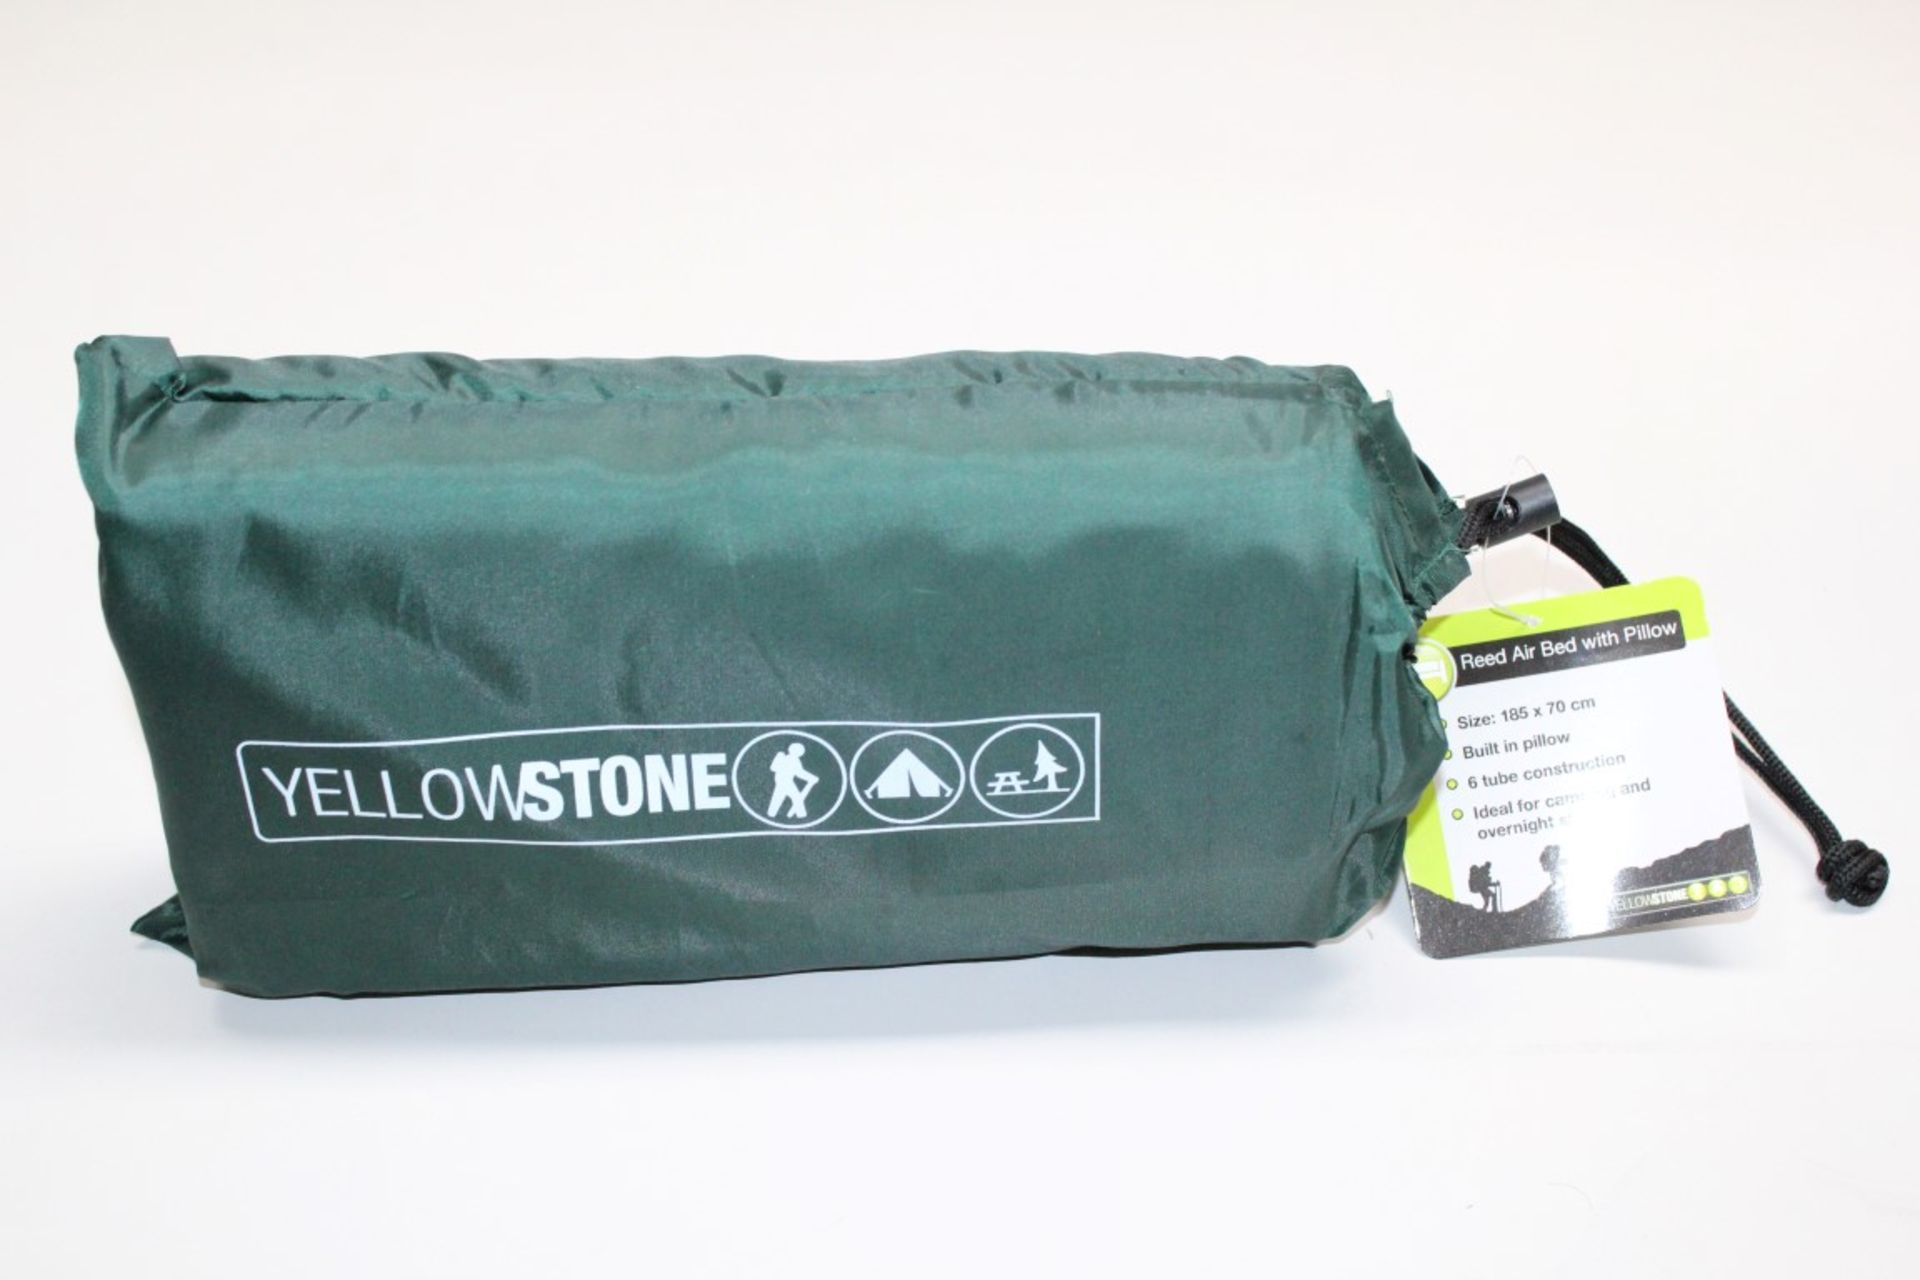 1 x Yellowstone Backpacker 6-Reed Air Bed with Pillow - Colour: Green - Bed and pillow included - - Image 2 of 2